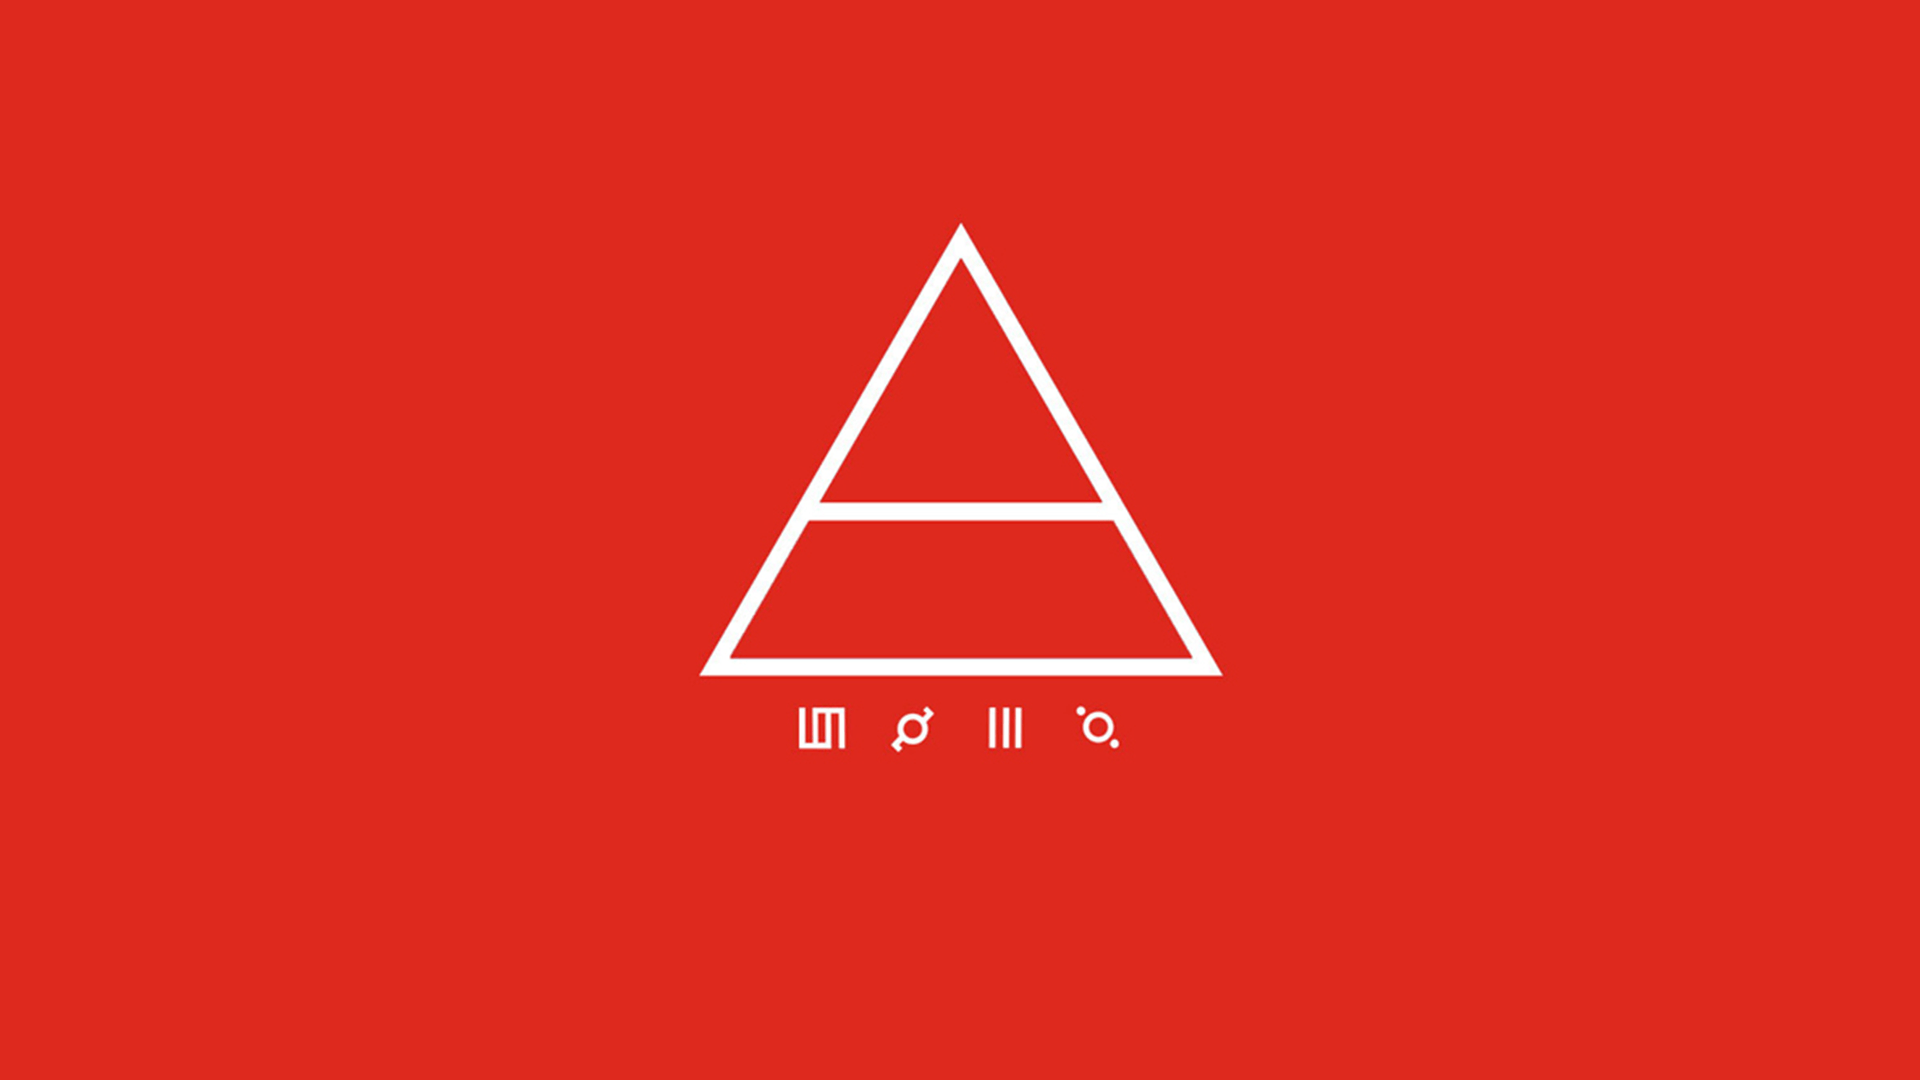 30 Seconds to Mars Logo - Red And White 30 Seconds To Mars Logo Wallpaper